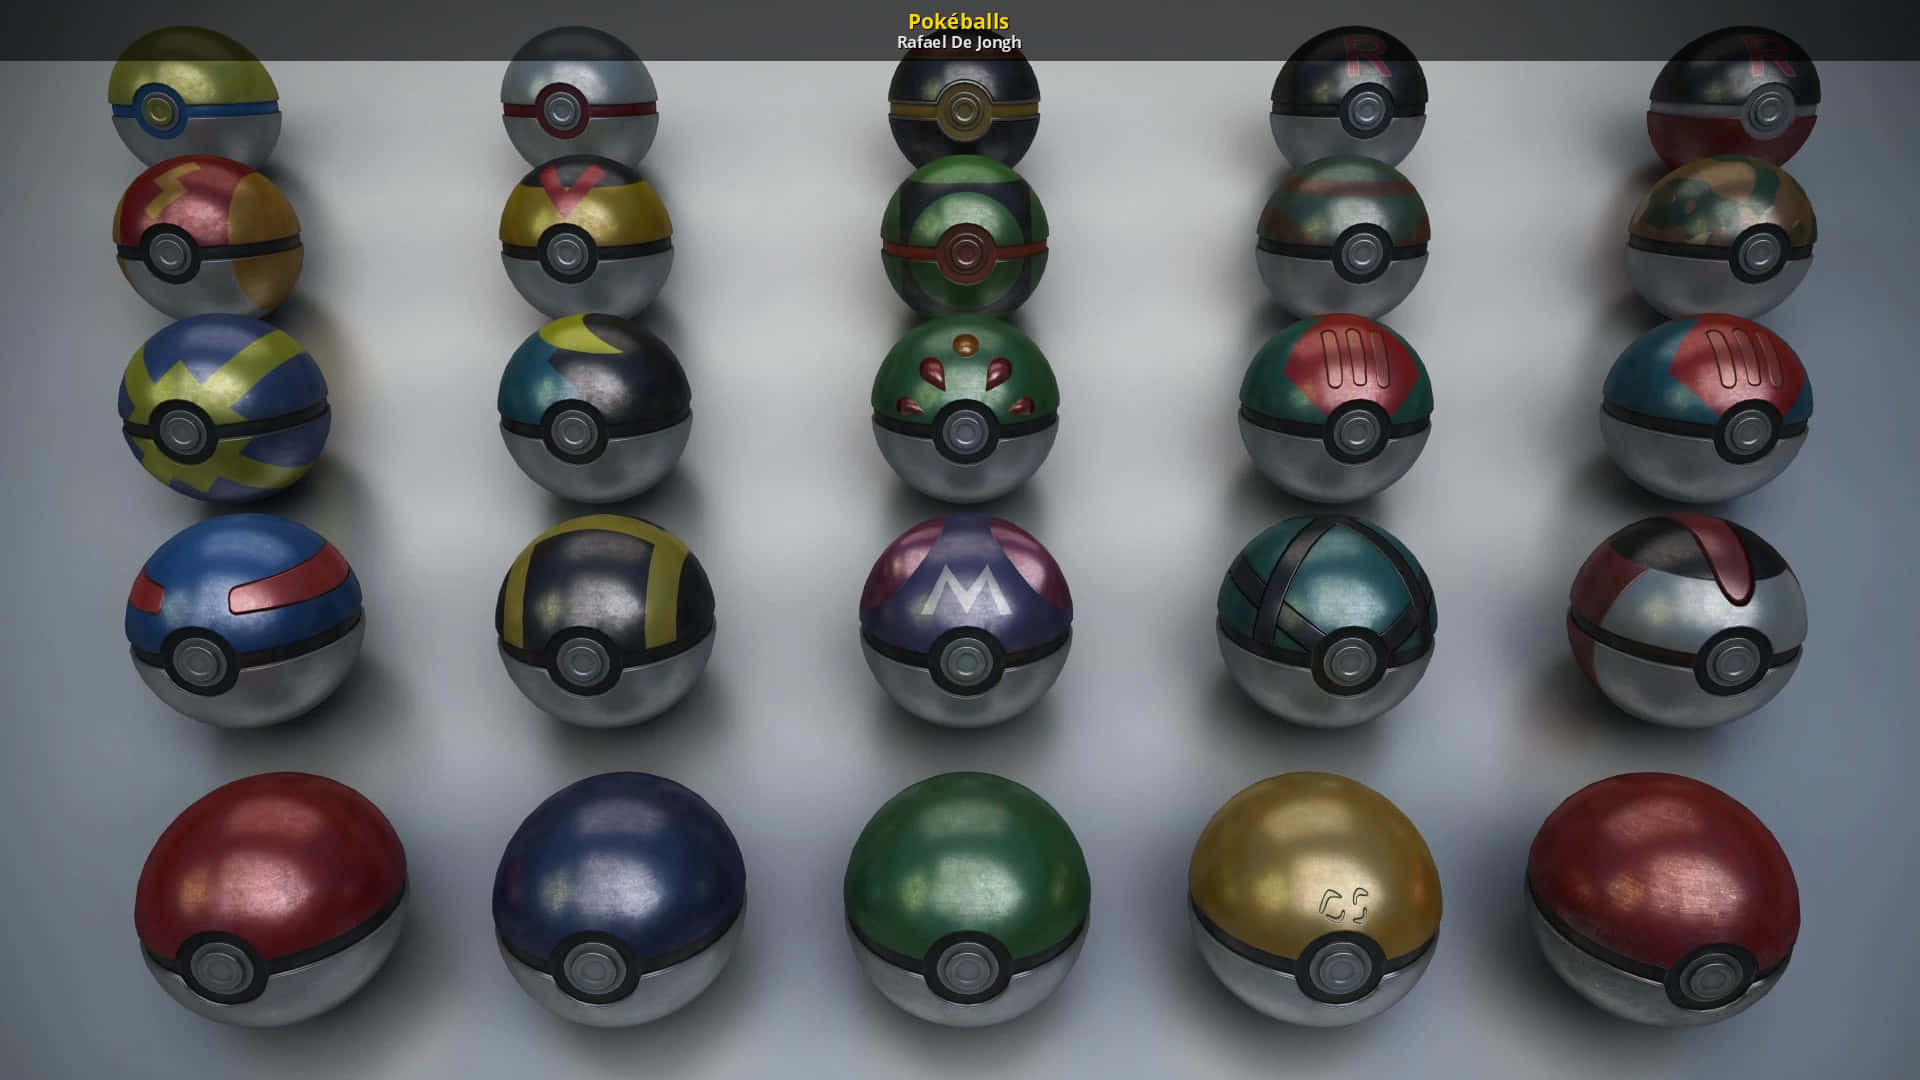 Image  A collection of iconic Pokeballs